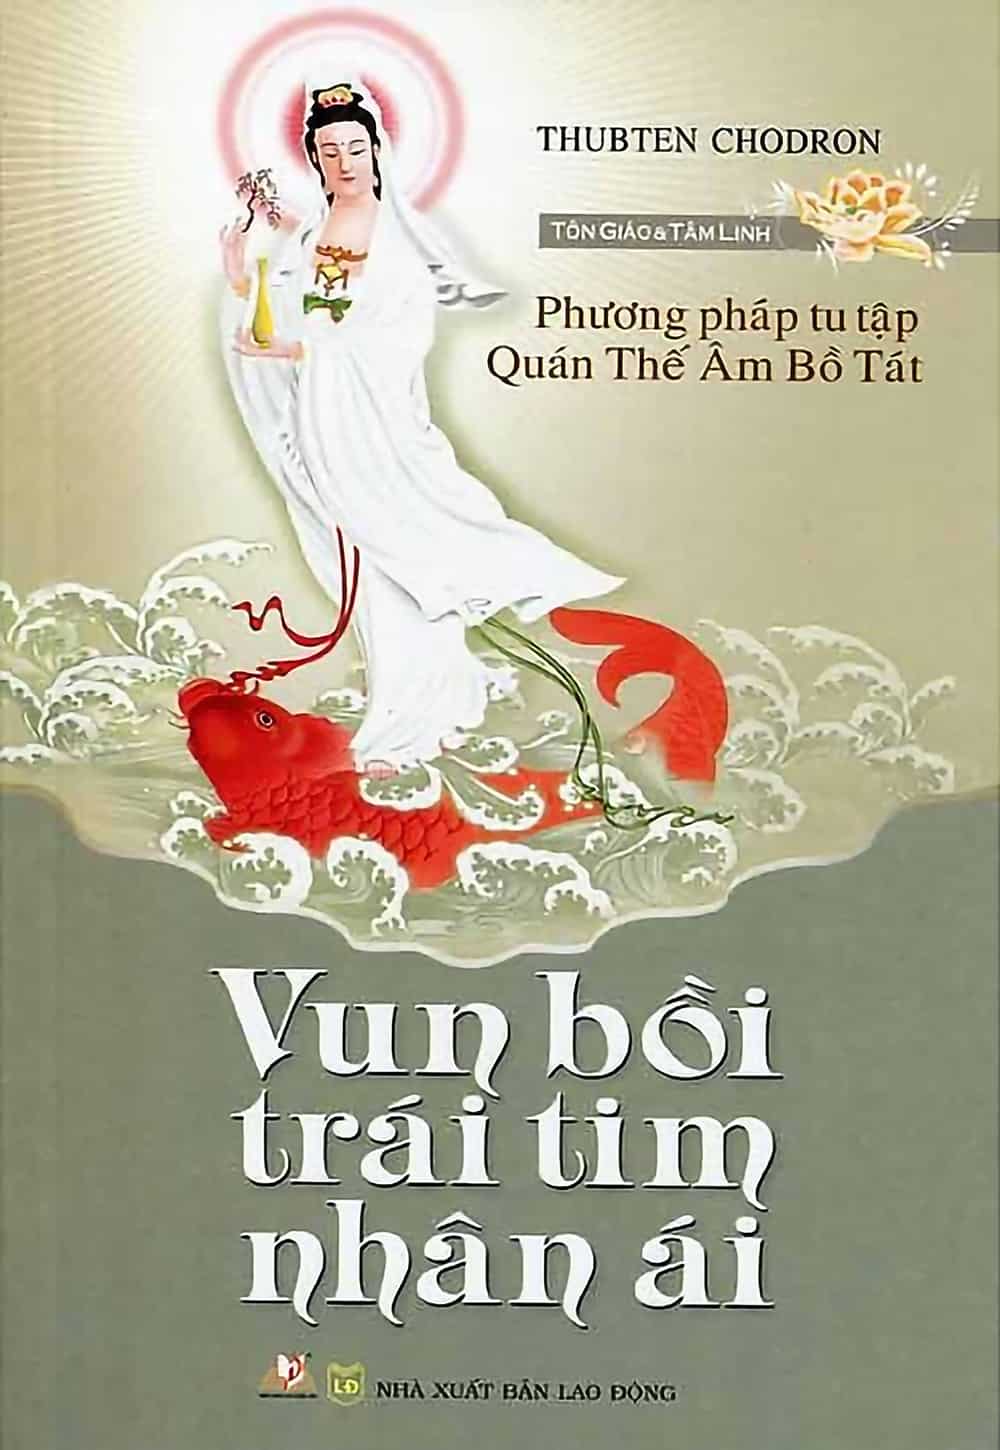 Cover of Cultivating a Compassionate Heart in Vietnamese